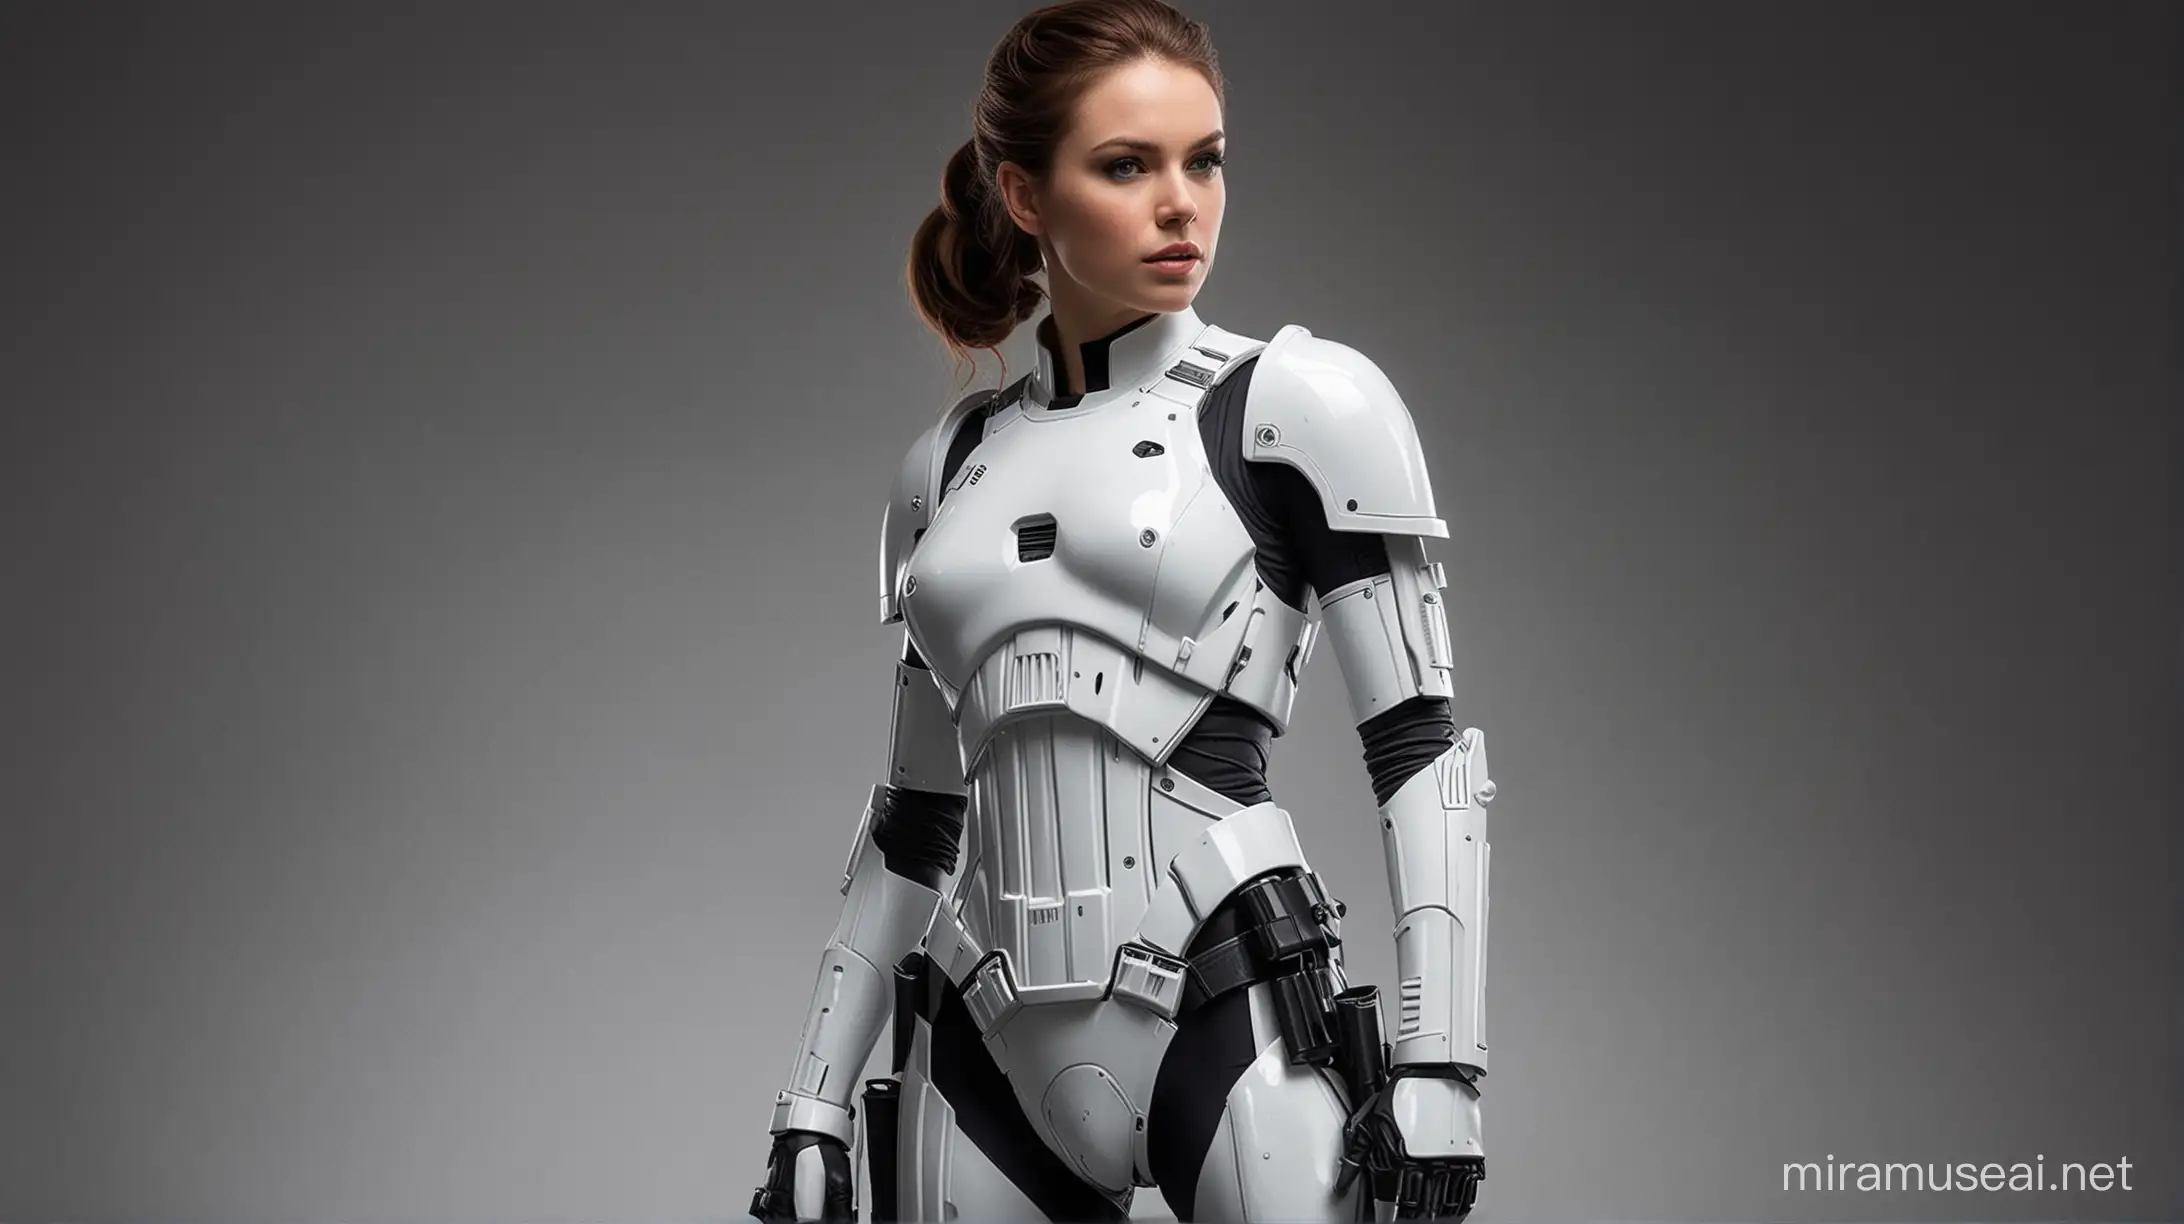 Sensual Star Wars Stormtrooper in Sultry Armor